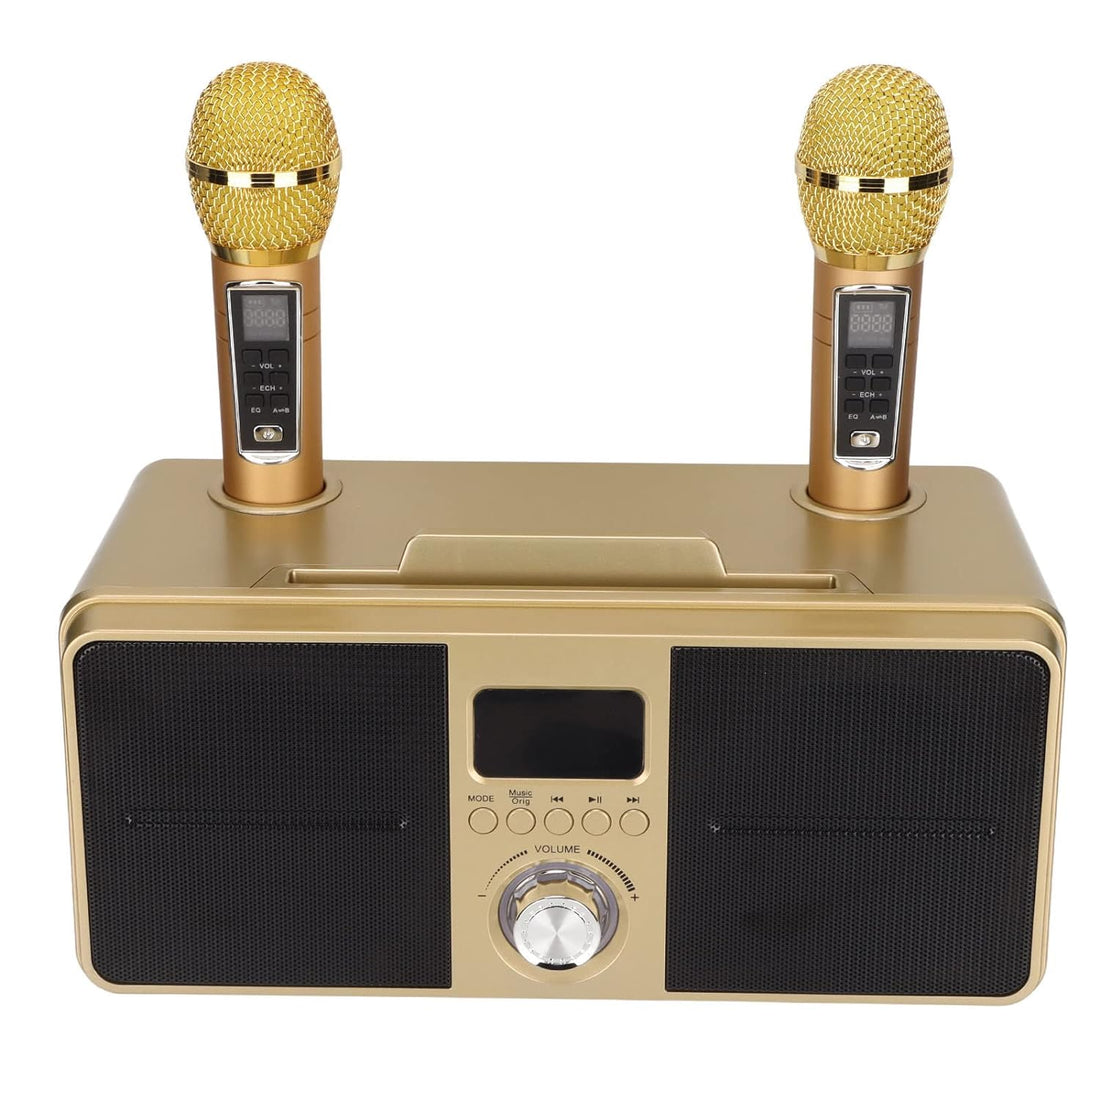 PUSOKEI Karaoke Machine, Portable Karaoke Speakers with 2 Wireless Microphones, Wireless Speaker System for KTV at Home, Gift for Adults and Kids